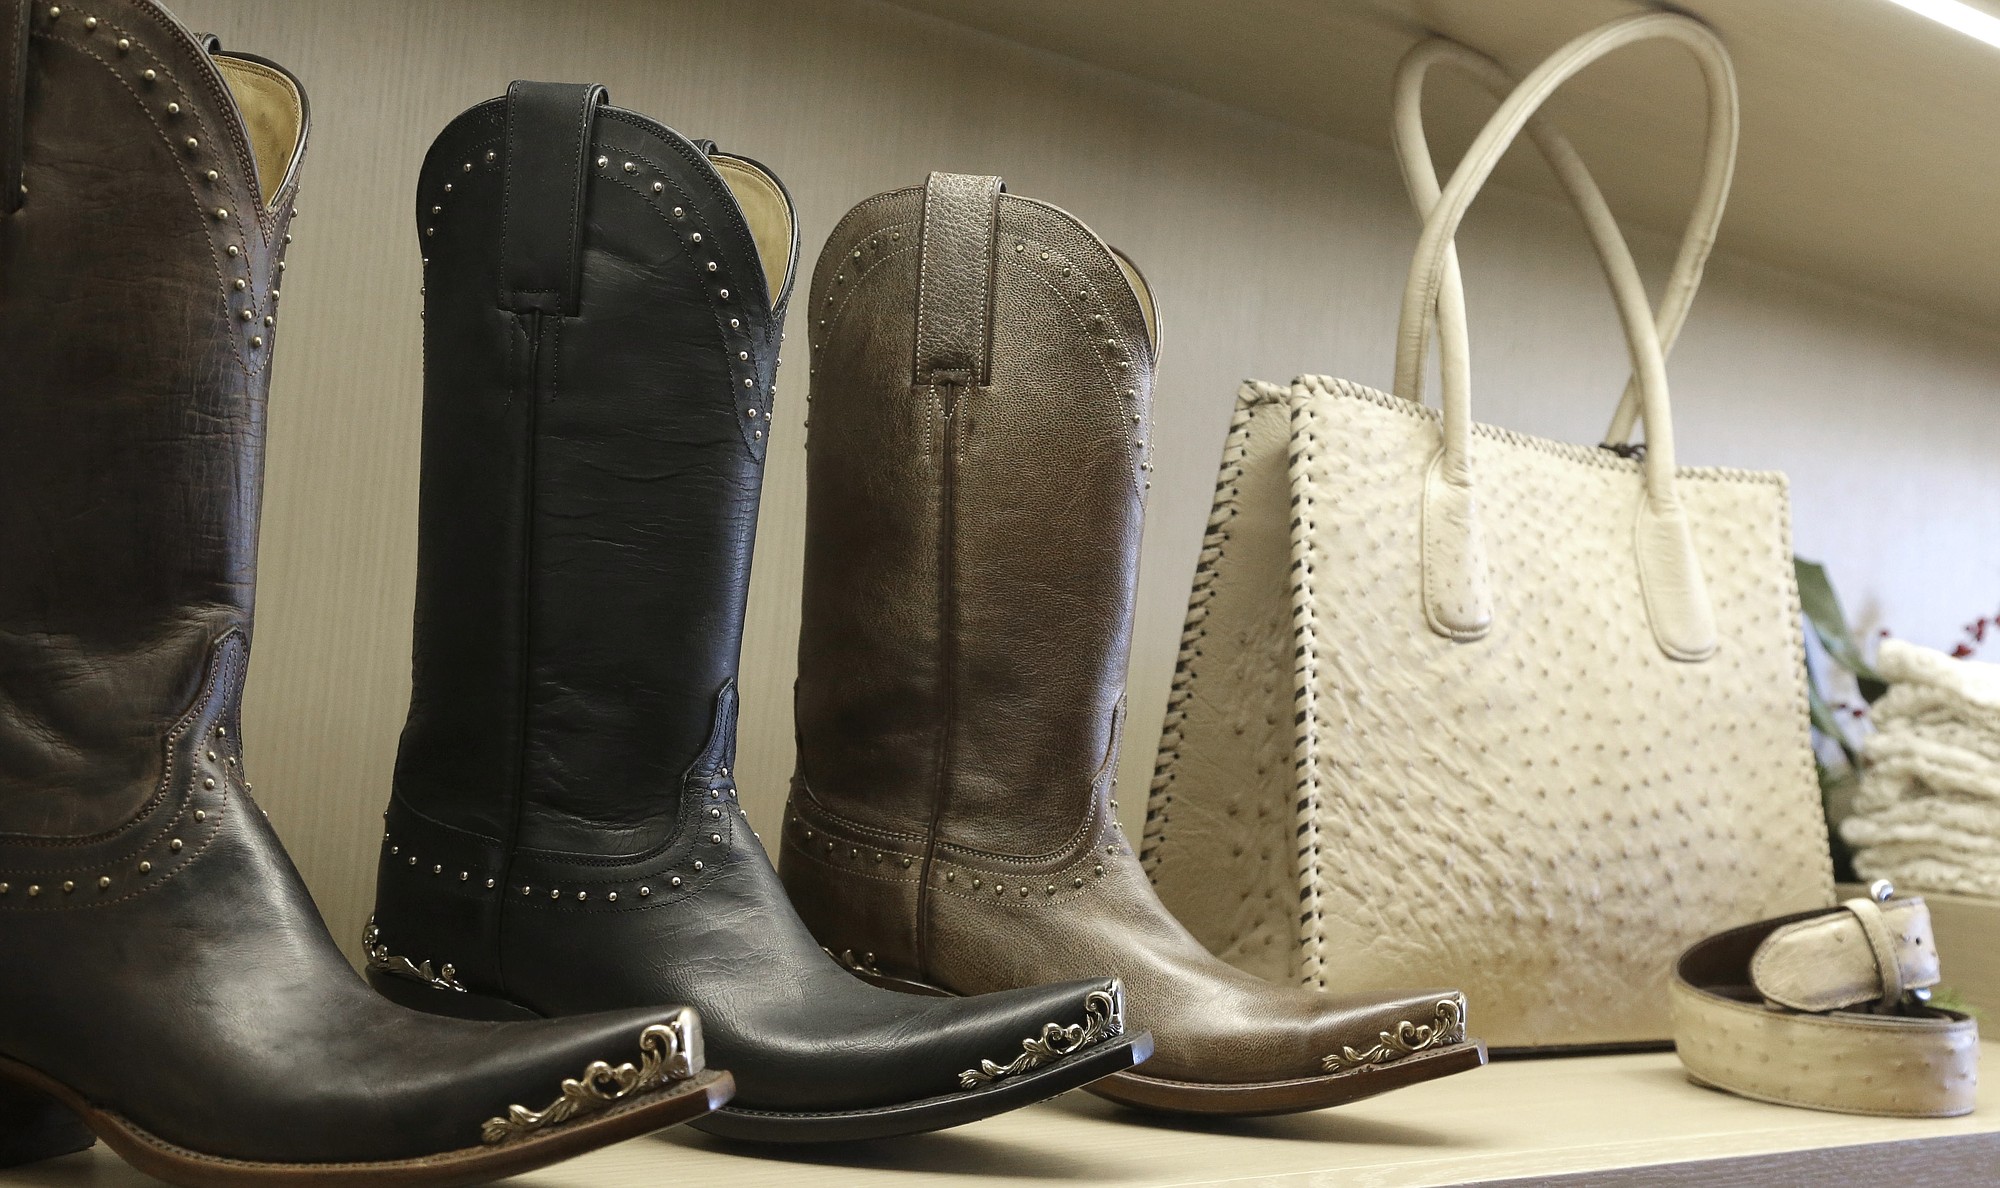 Western boots share shelf space with a purse and belt at the Lucchese Bootmaker shop in Houston.